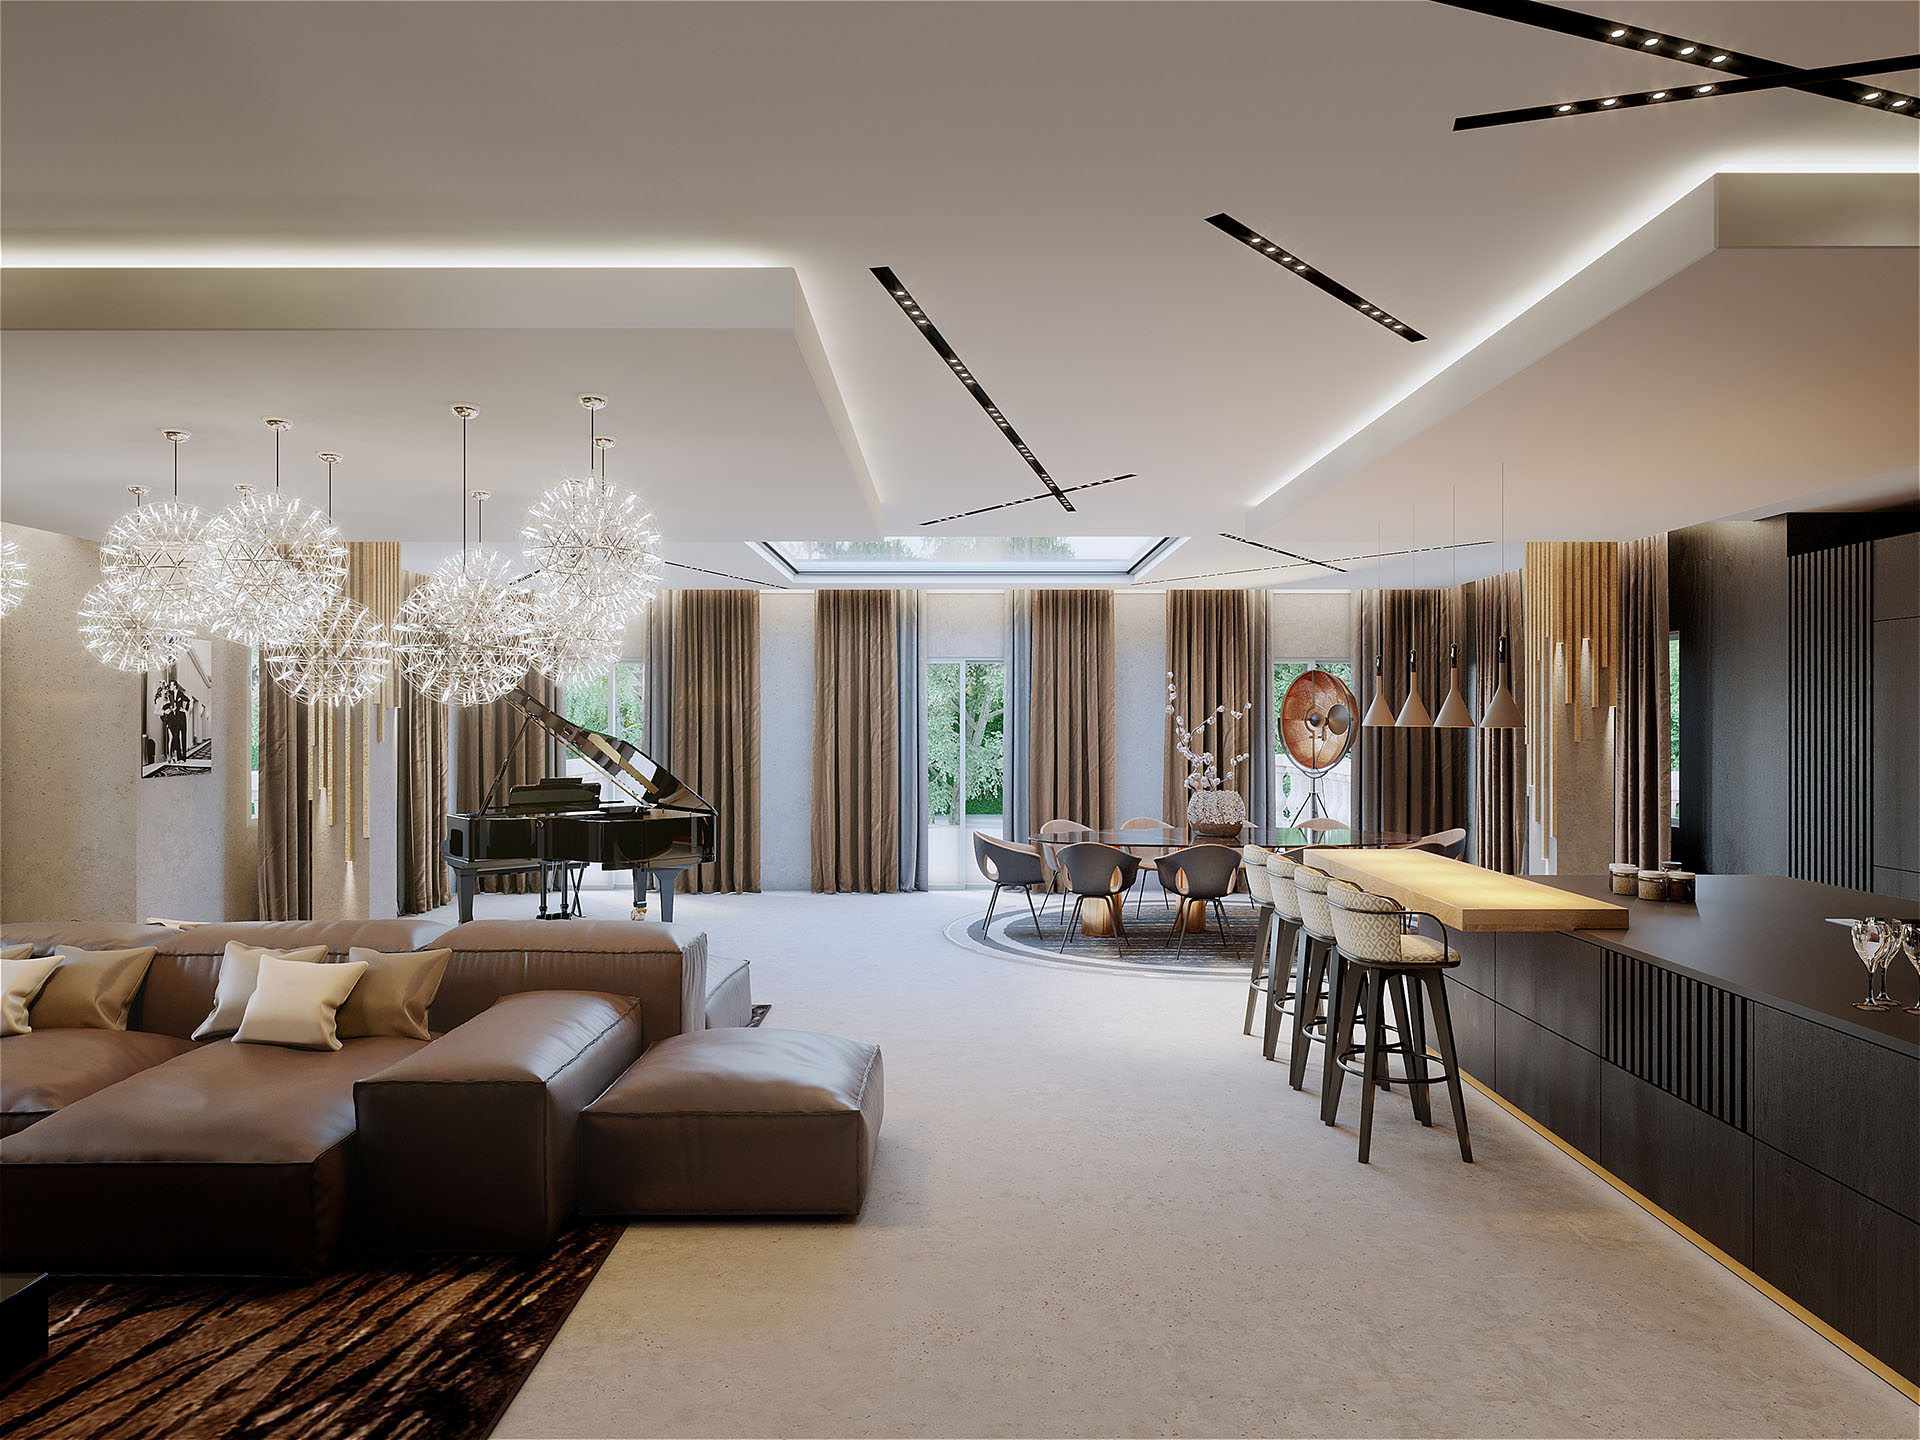 3D photorealistic image of the living room of a luxury villa